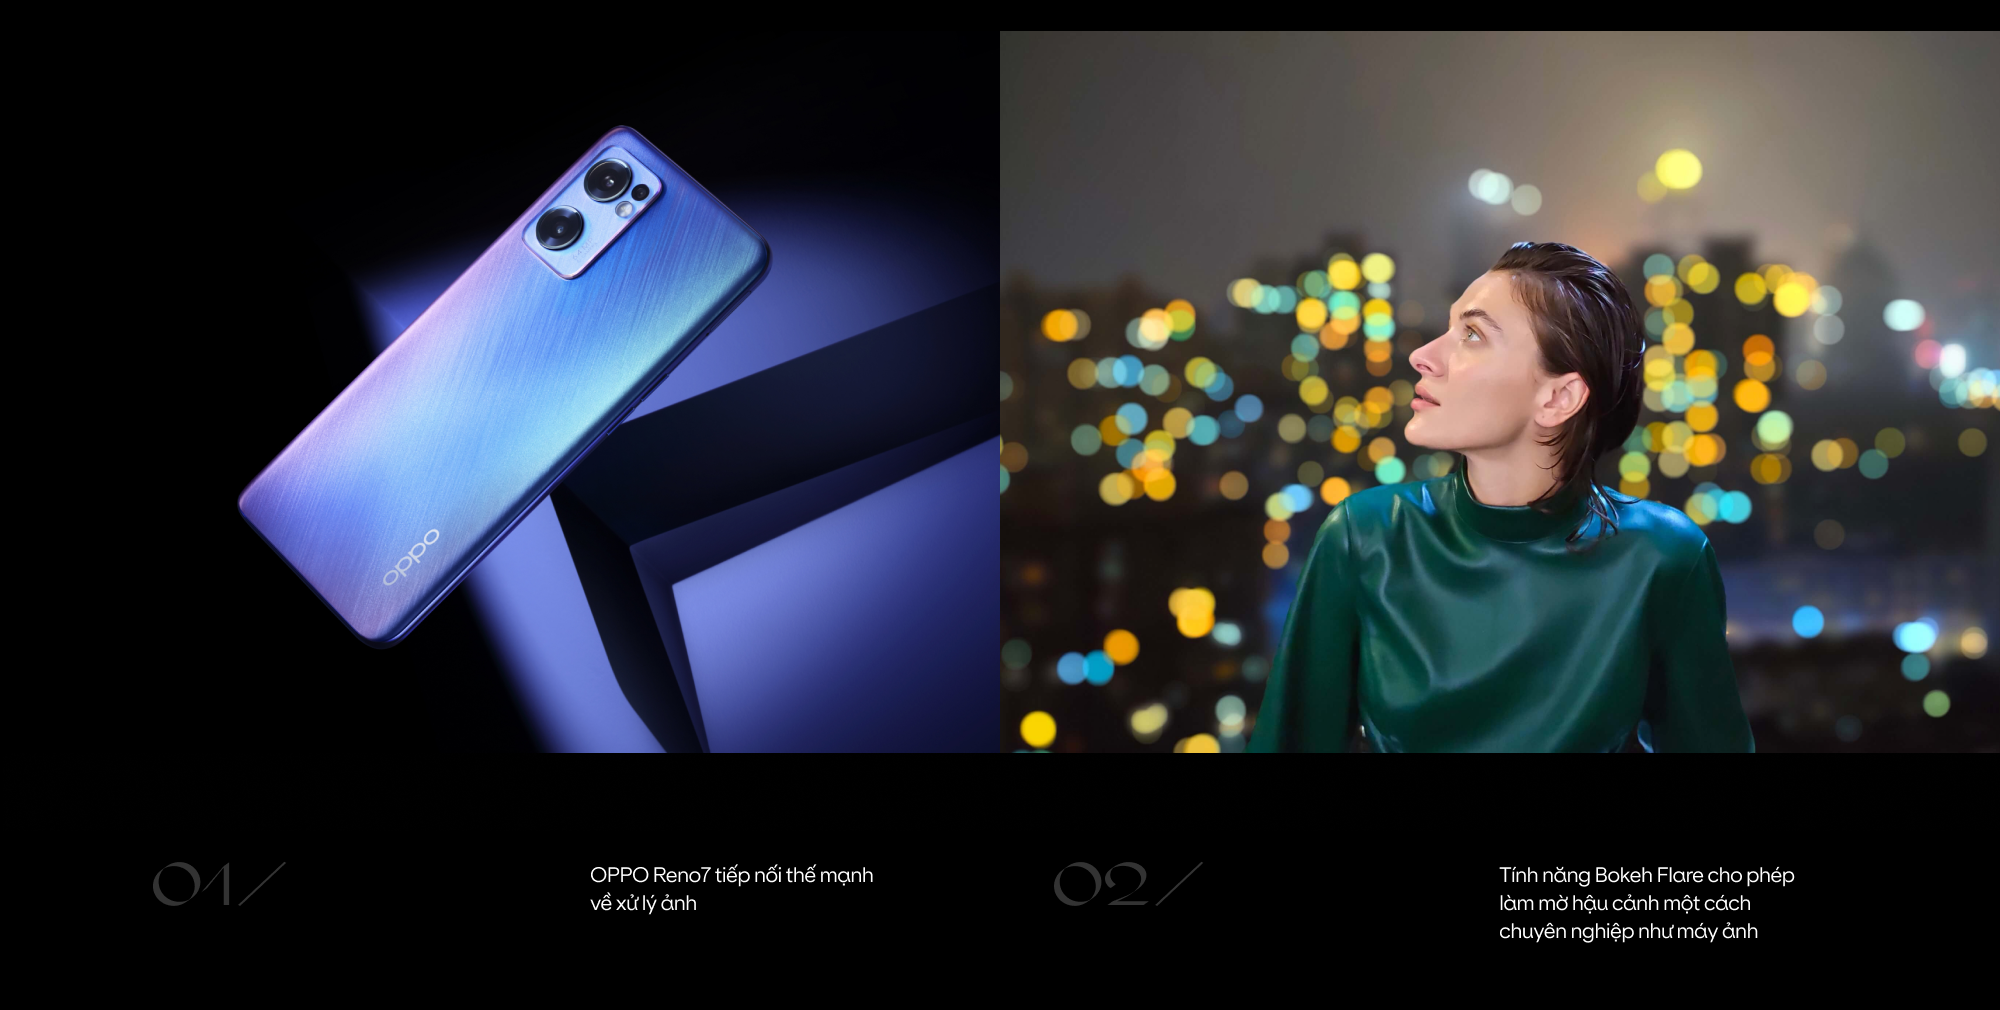 4 years and 10 years of OPPO Reno: looking at the ultra-fast development of smartphones with young people - photo 13.